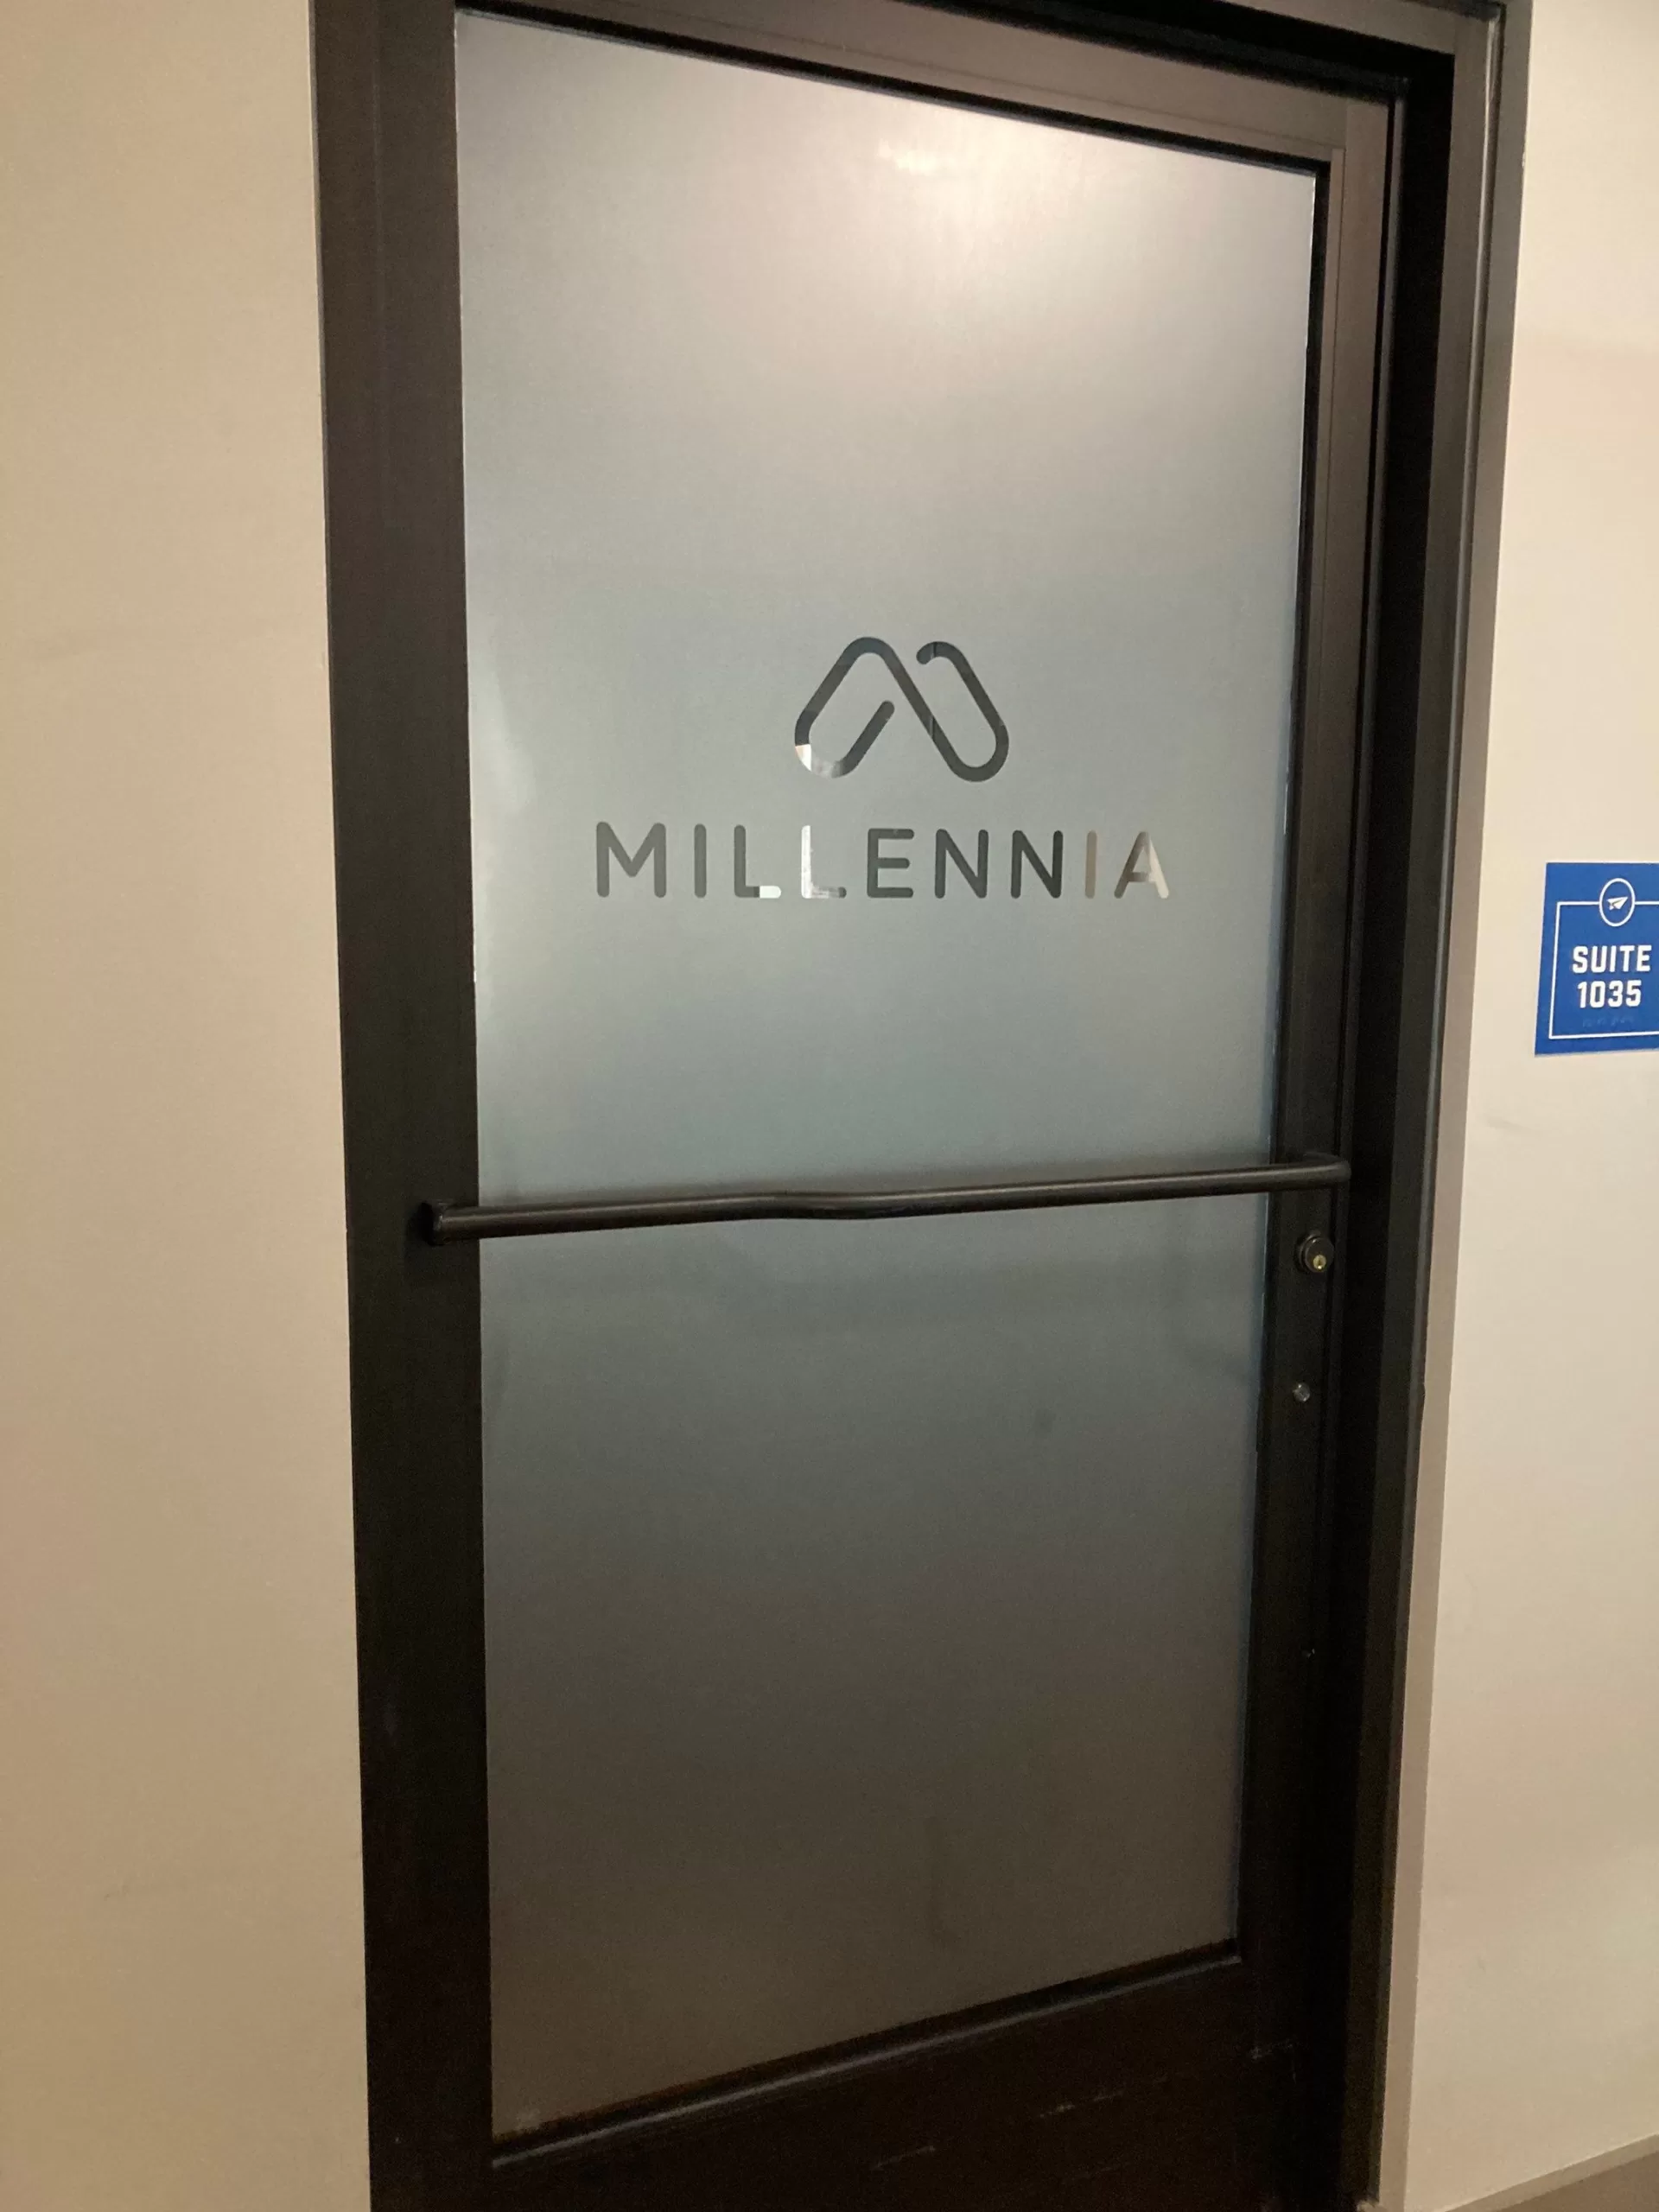 Frosted Vinyl With Cut Logo Of Millennia Designed By Elite Custom Signs In Raleigh